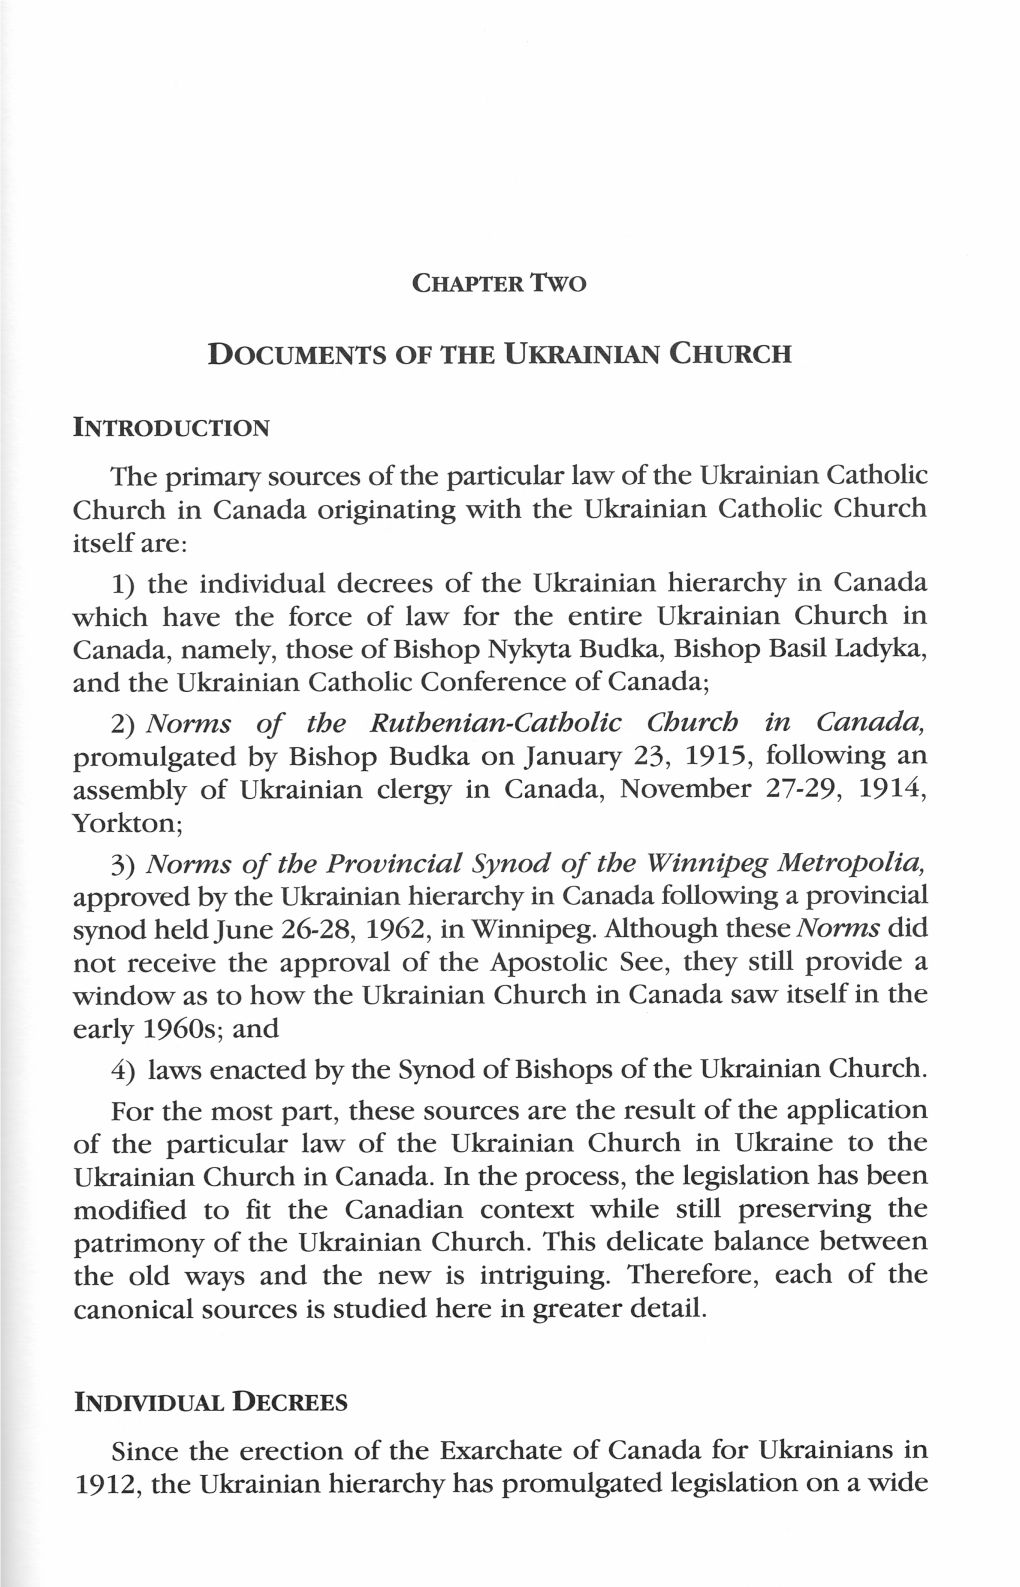 2) Norms of the Ruthenian-Catholic Church in Canada, 3) Norms of The